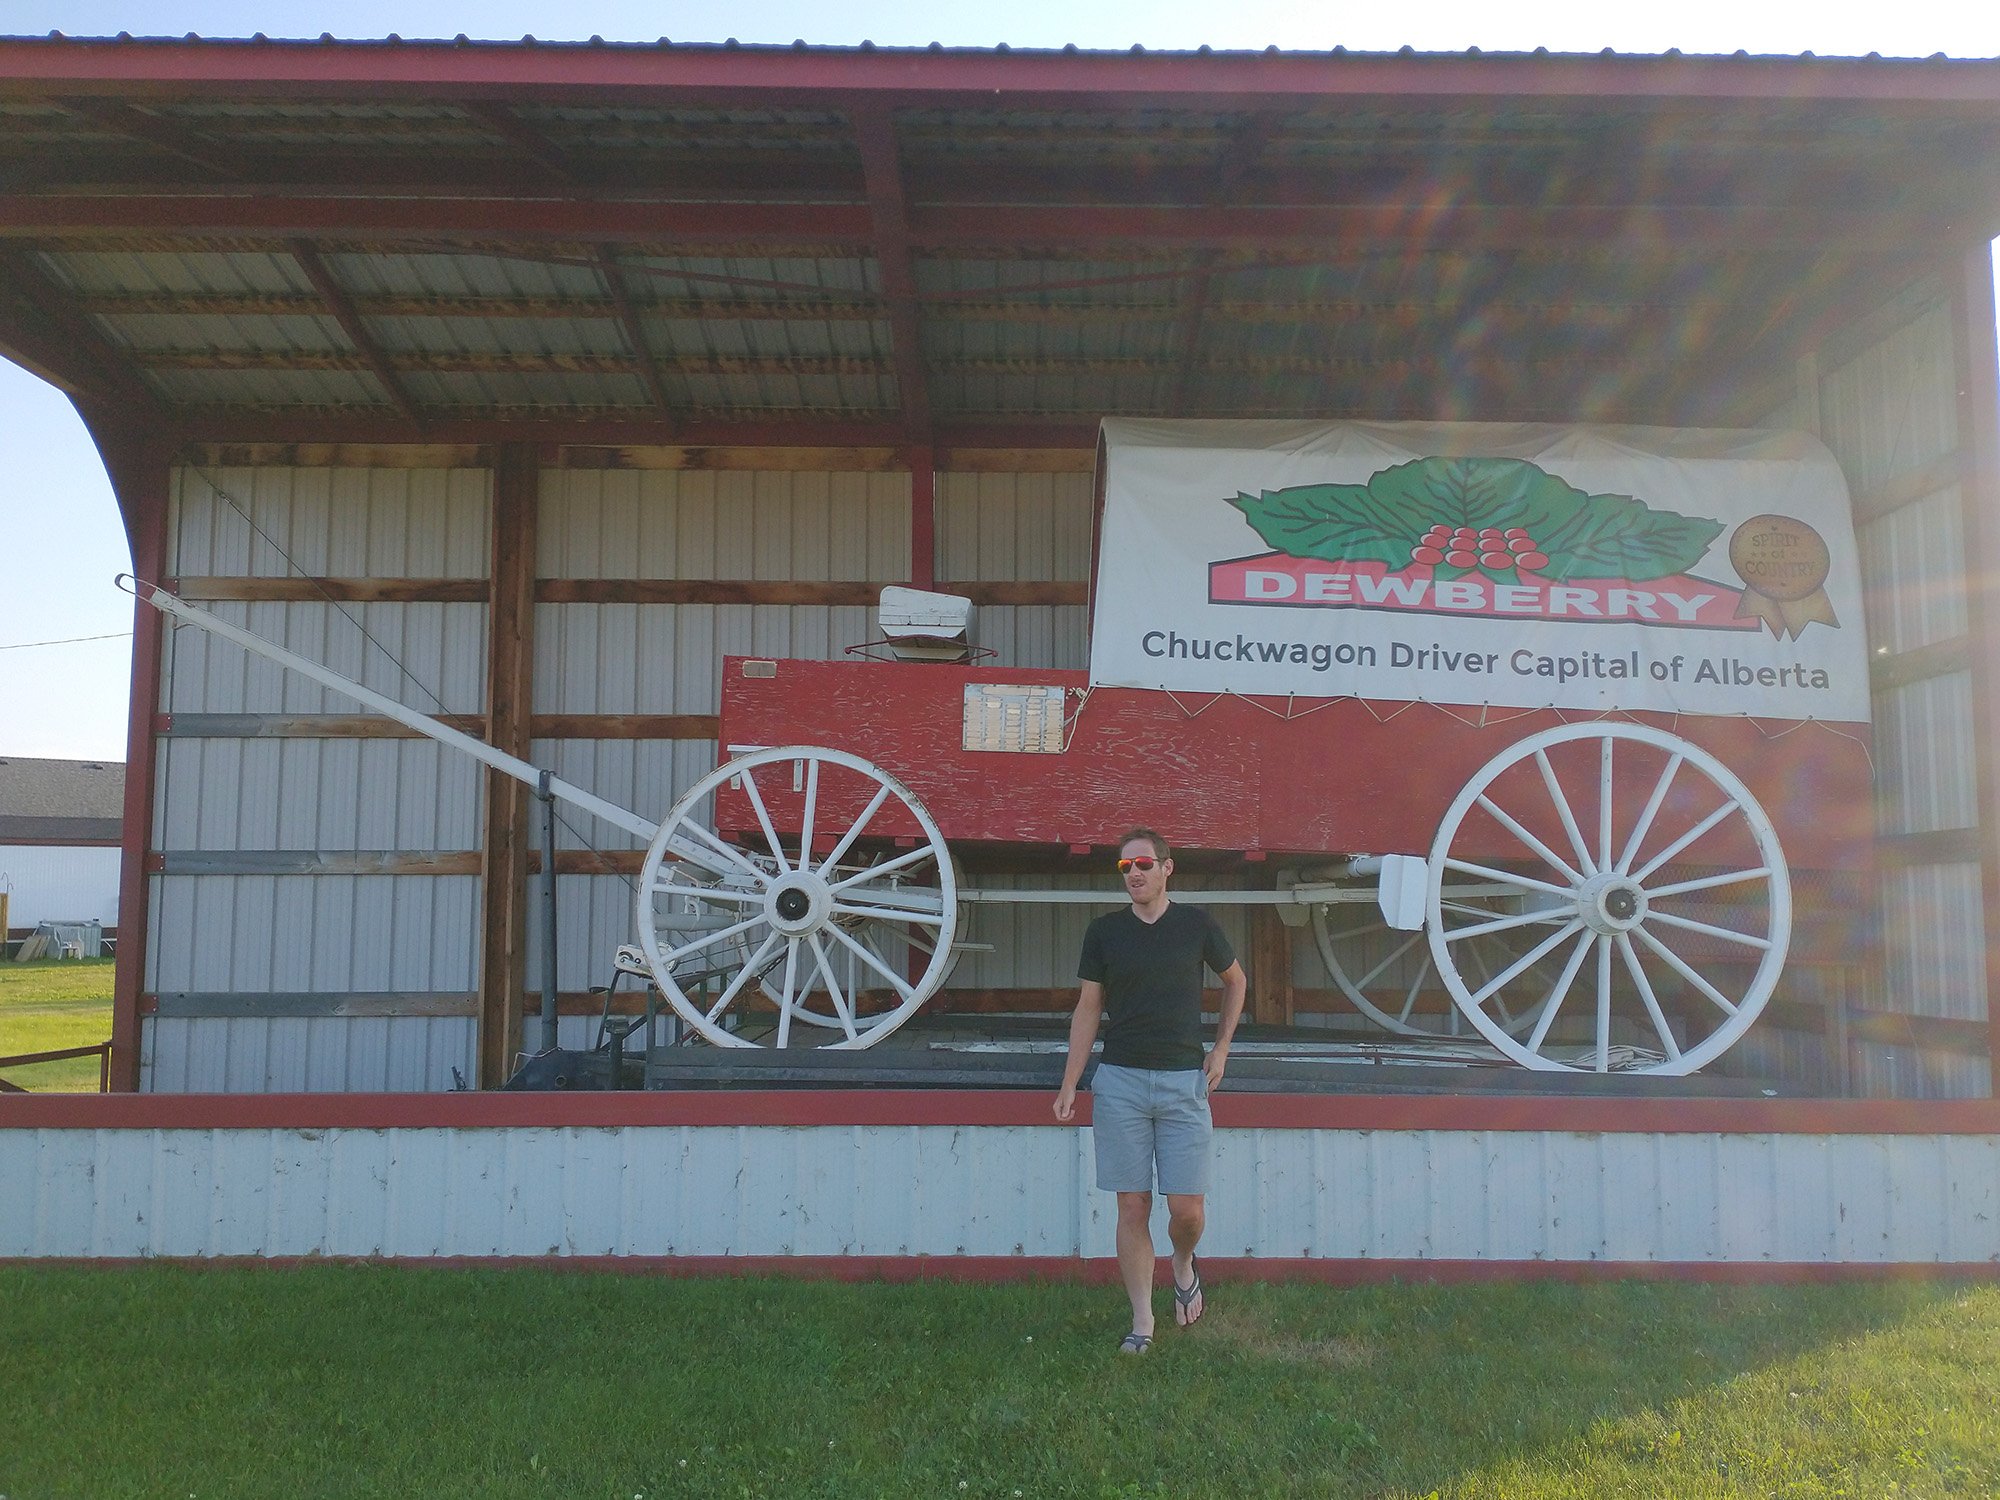 Dewberry: Largest Chuckwagon. I'm guessing it was used and not just a joke statue? Kind of just weird.